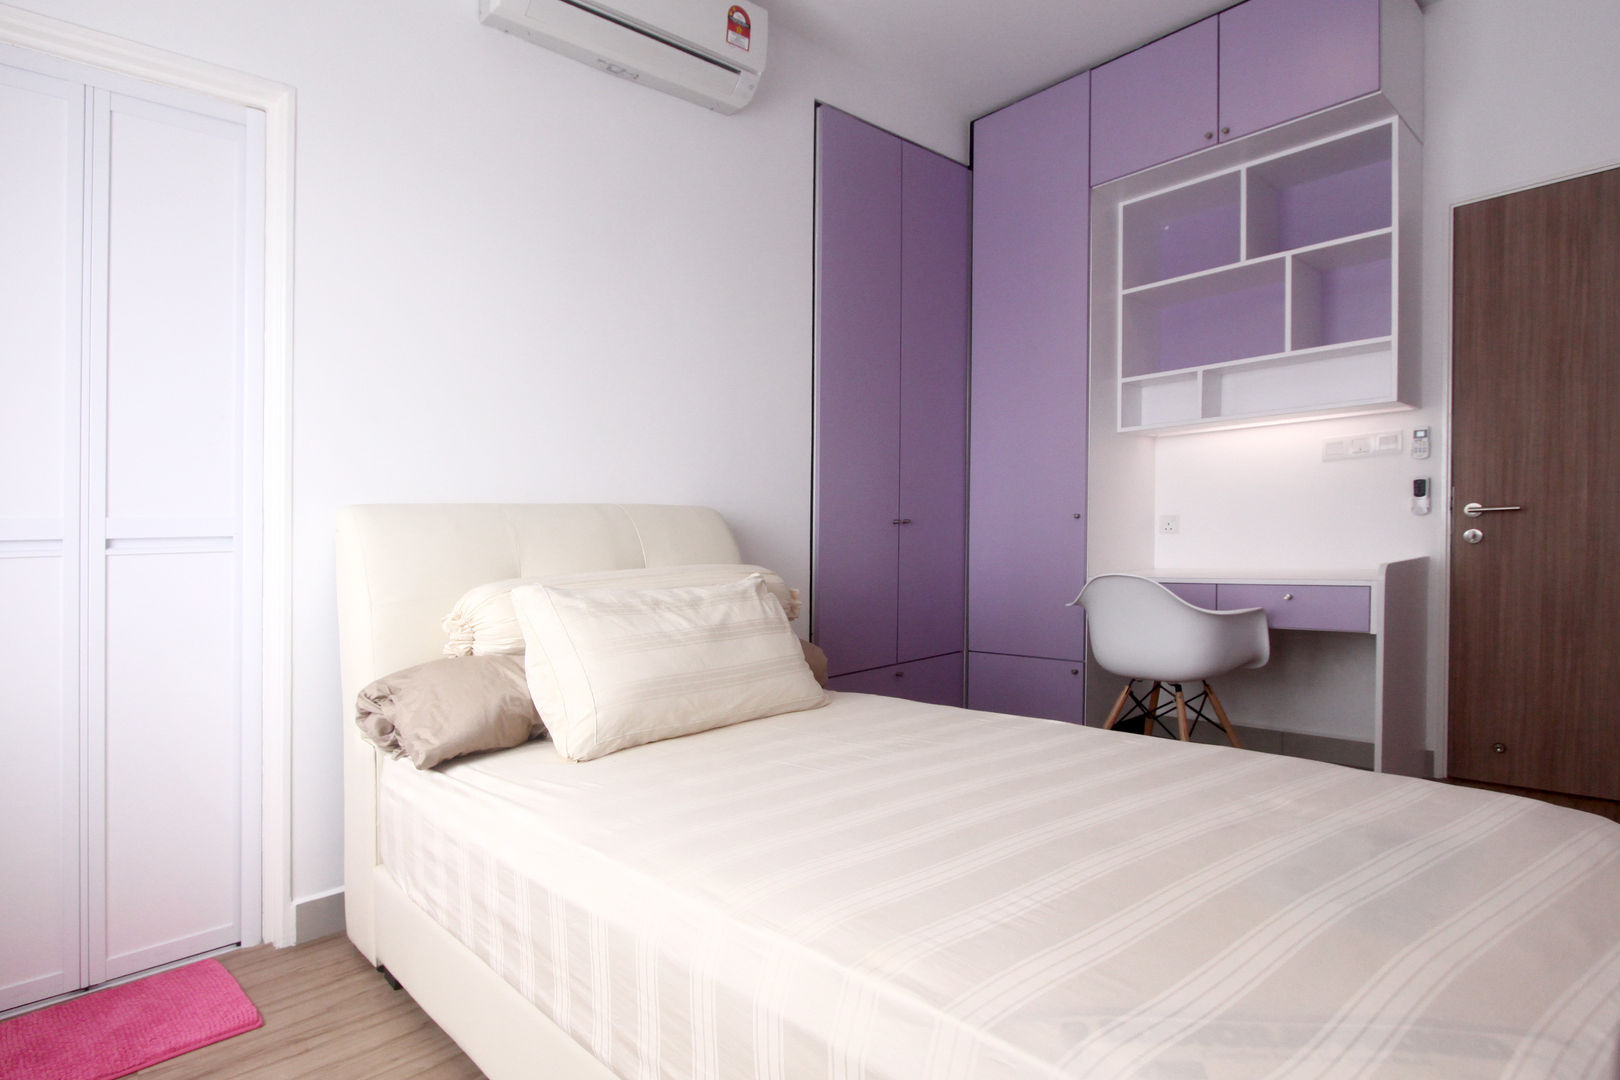 The Sanderson Home, inDfinity Design (M) SDN BHD inDfinity Design (M) SDN BHD Modern style bedroom